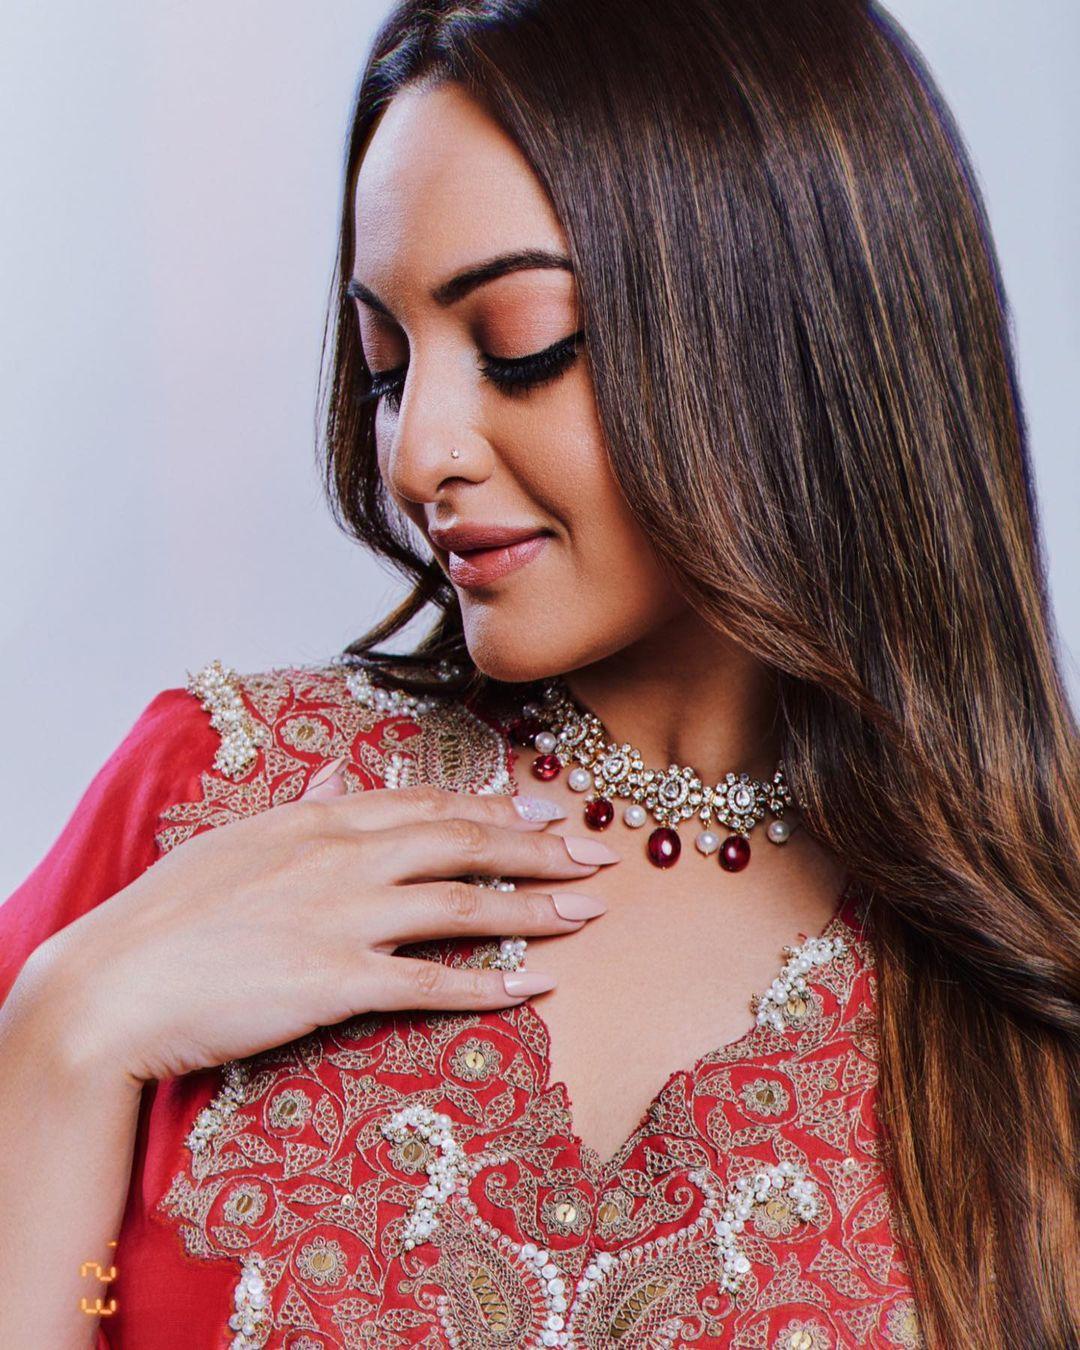 The actress's kurta has an intricate design around the neckline. While Sonakshi kept a dewy makeup, her soft curls and intricate jewellery stole the show